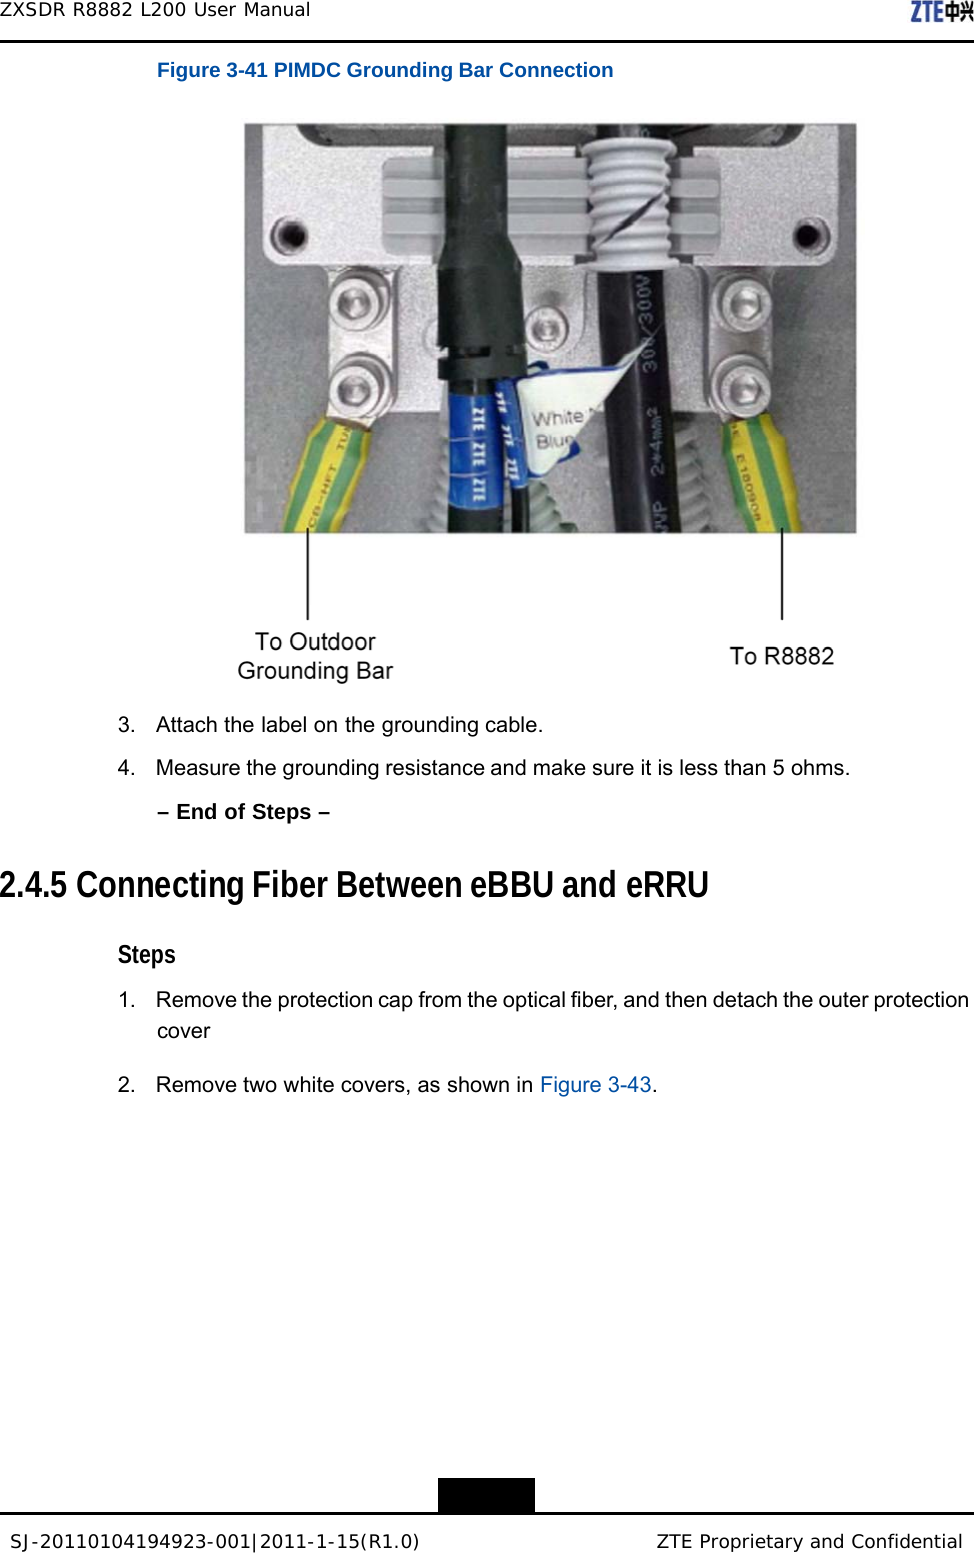 SJ-20110104194923-001|2011-1-15(R1.0) ZTE Proprietary and Confidential ZXSDR R8882 L200 User Manual    Figure 3-41 PIMDC Grounding Bar Connection    3. Attach the label on the grounding cable.  4. Measure the grounding resistance and make sure it is less than 5 ohms.  – End of Steps –   2.4.5 Connecting Fiber Between eBBU and eRRU   Steps  1. Remove the protection cap from the optical fiber, and then detach the outer protection cover  2.  Remove two white covers, as shown in Figure 3-43.         3-30 